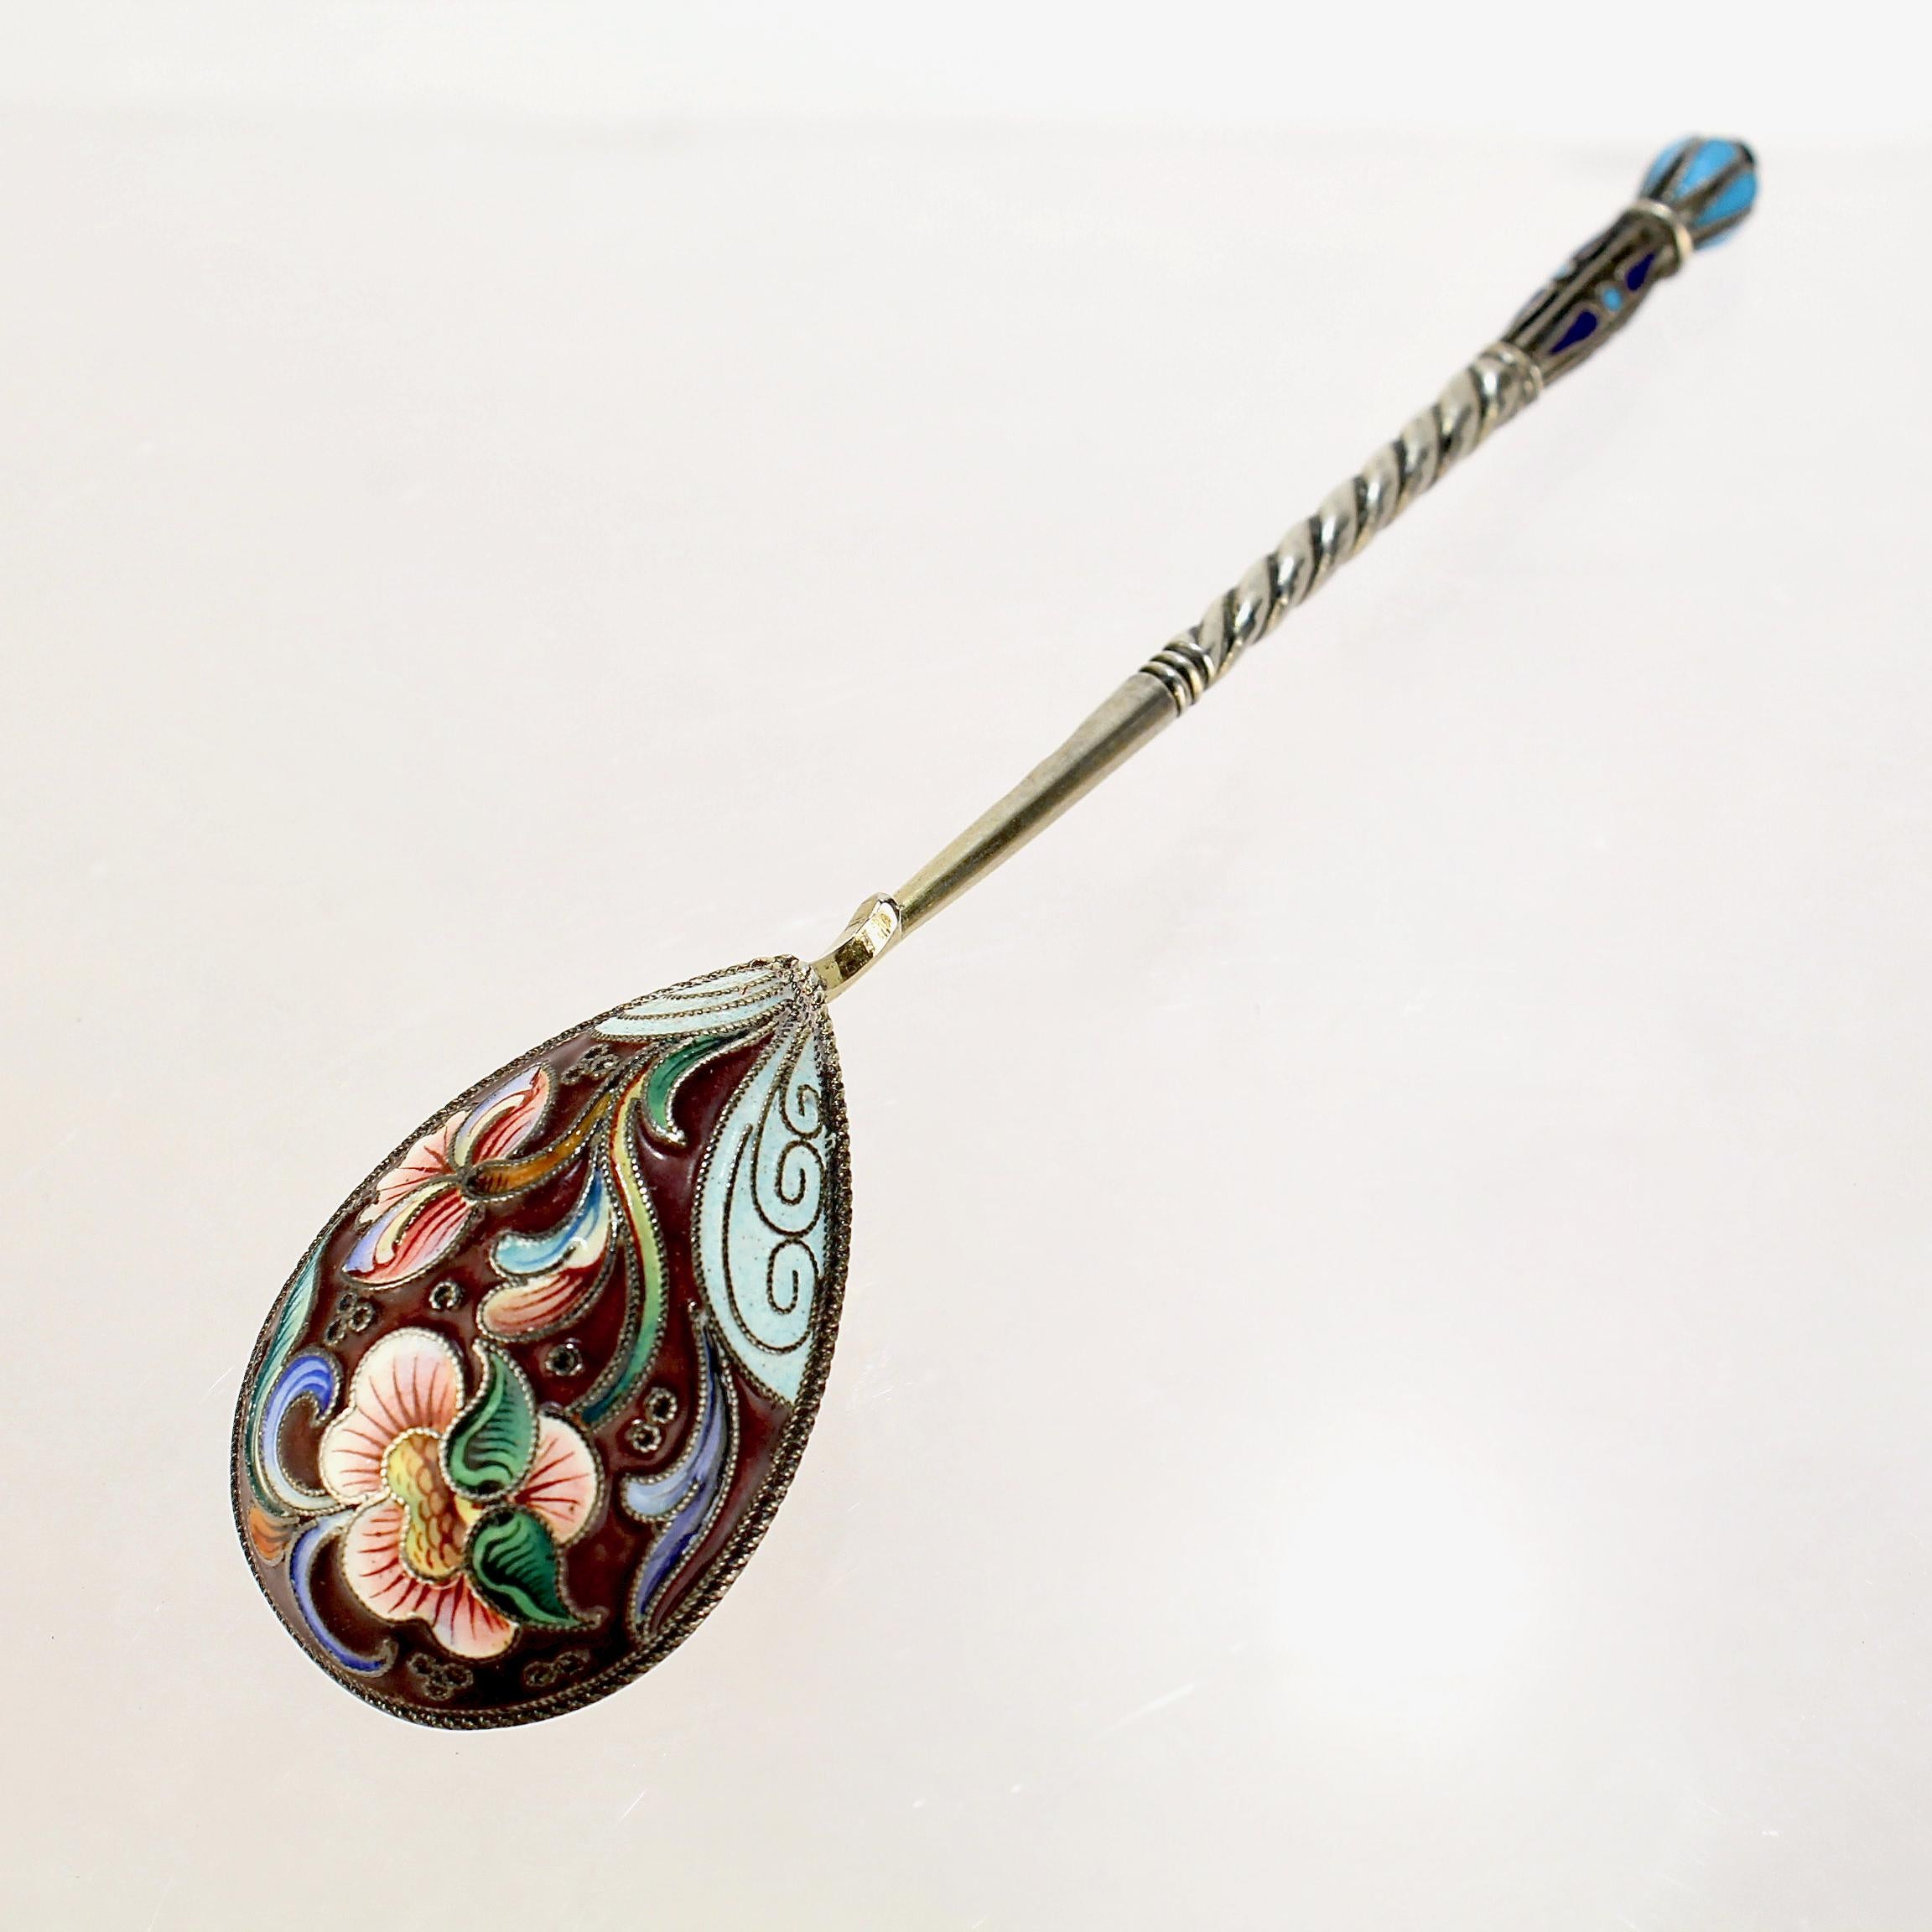 A very fine antique Russian tea or kvosh spoon.

By Maria Sokolova.

With polychrome shaded cloisonné enamel decoration to both the front and reverse.

Simply a wonderful piece of Imperial Russian silver!

Date:
Late 19th or Early 20th